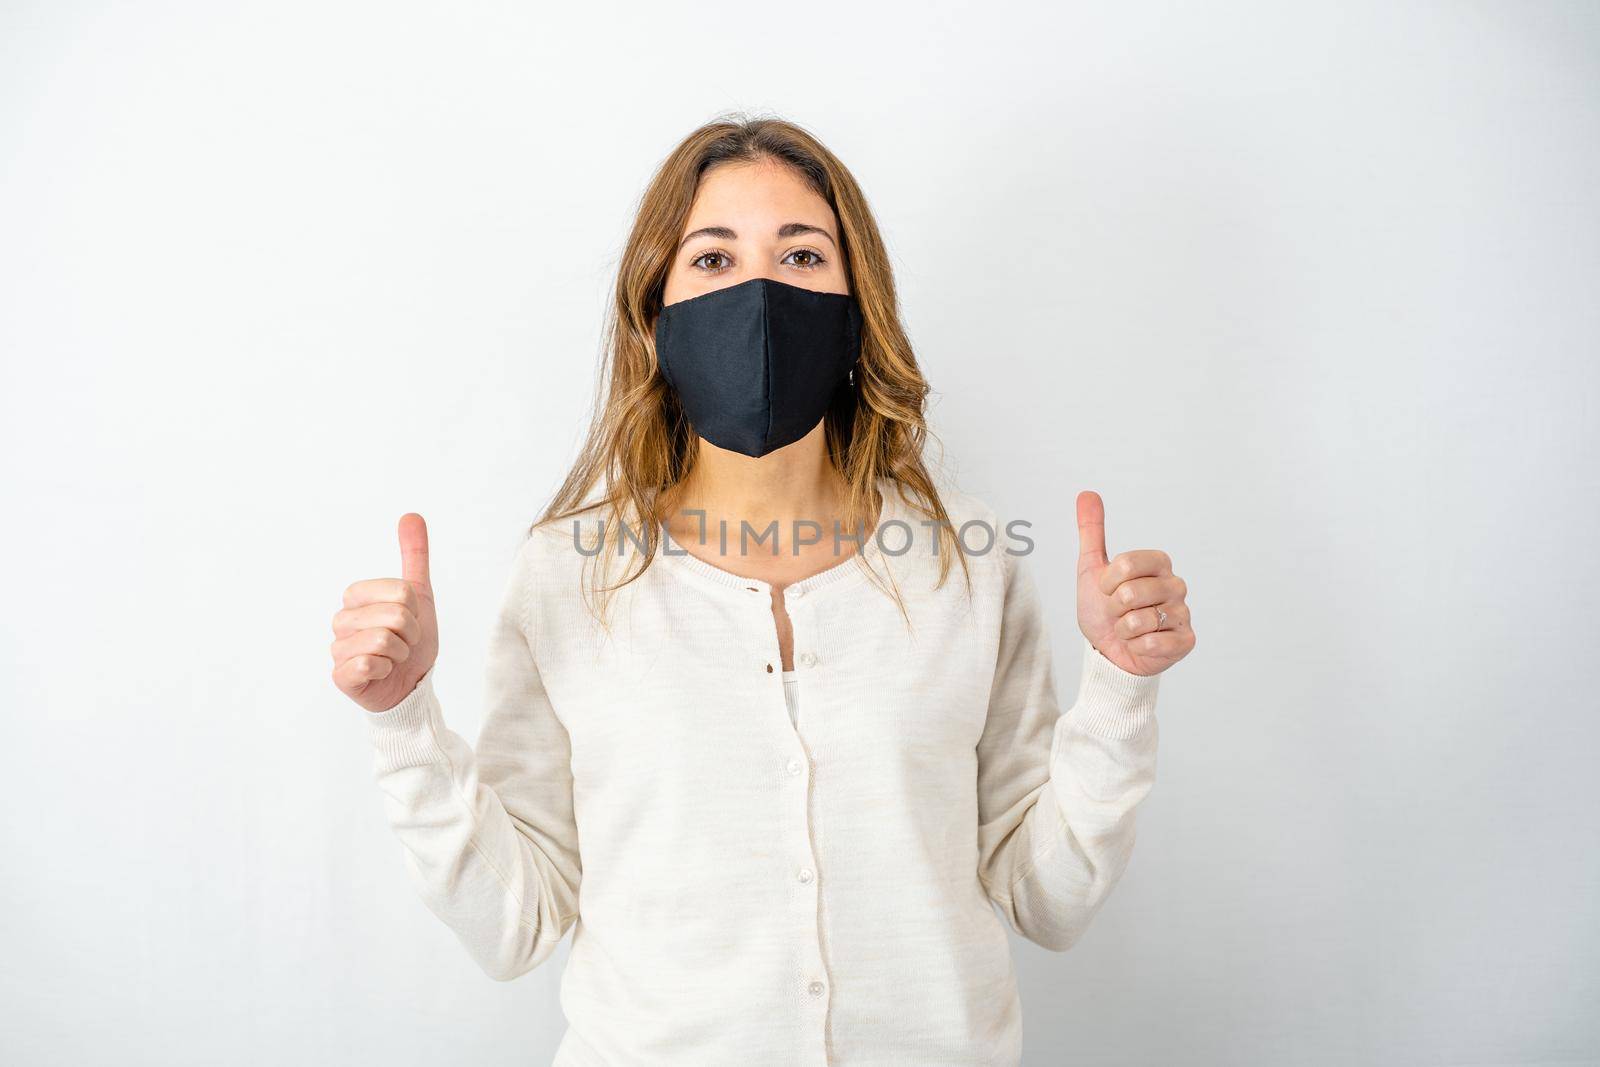 Studio shot of Caucasian confident young woman show hands with thumbs-up gesture wearing Coronavirus protective mask on white background. Concept of thinking positive for the future due to Covid-19